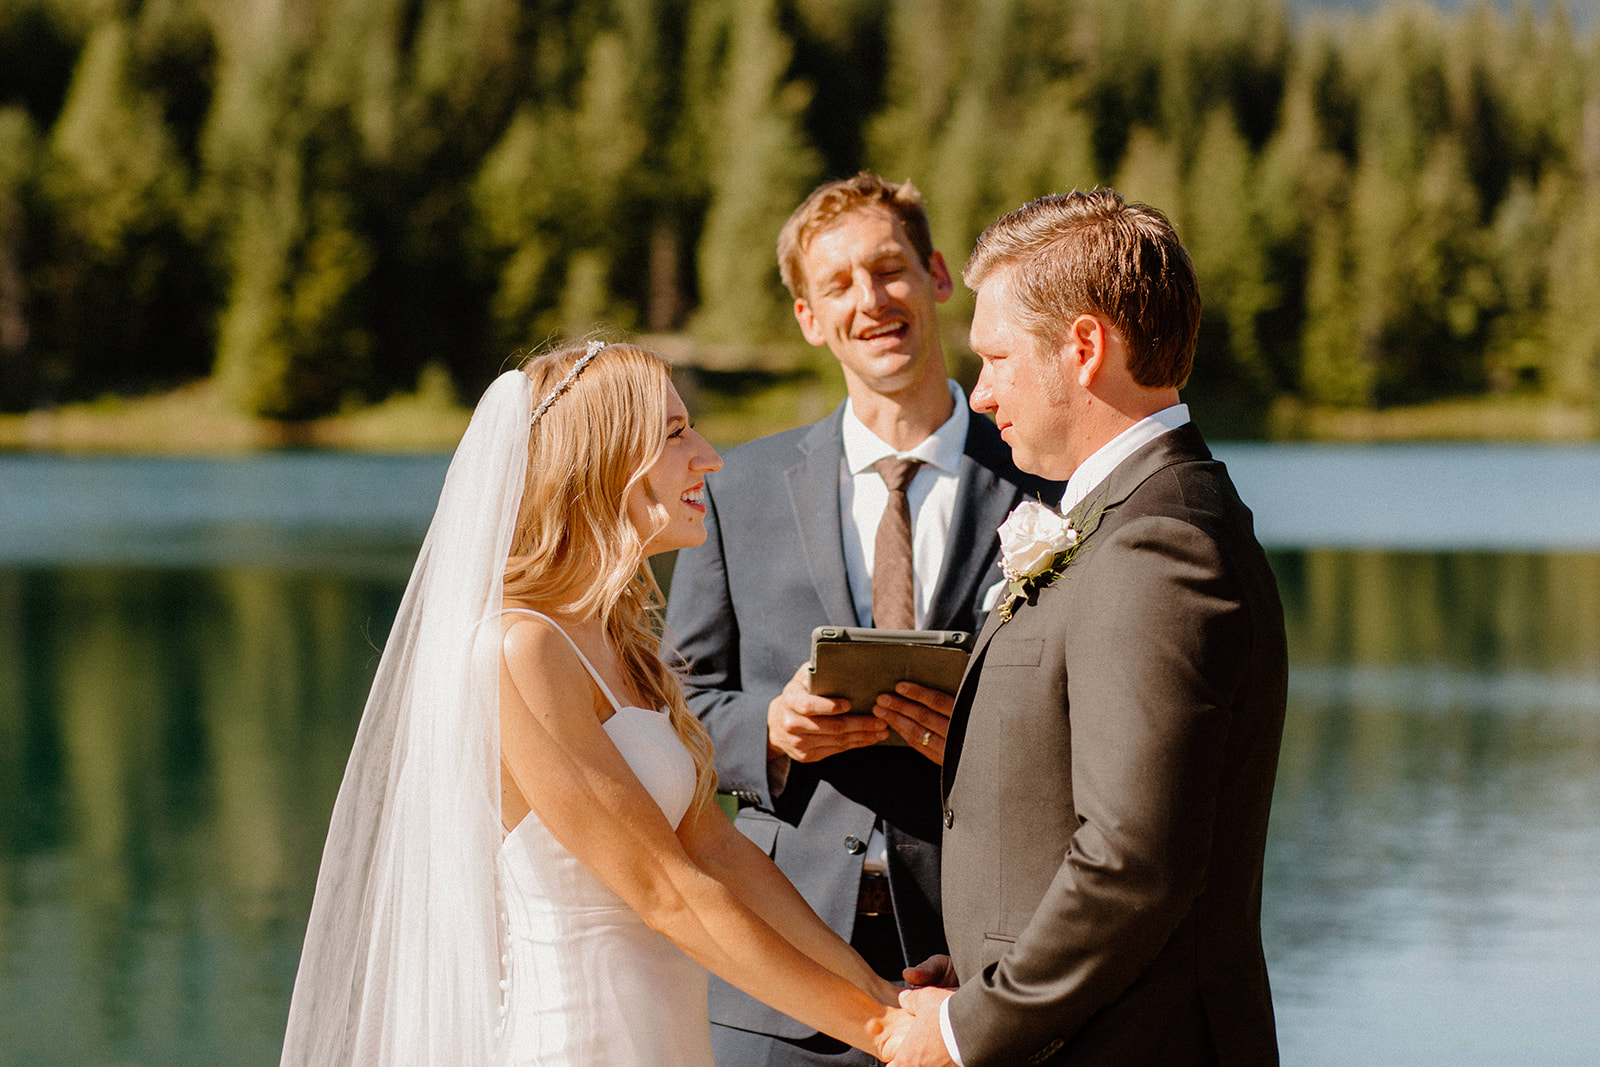 Gold Creek Pond elopement in Washington with beautiful decor and forest vibes